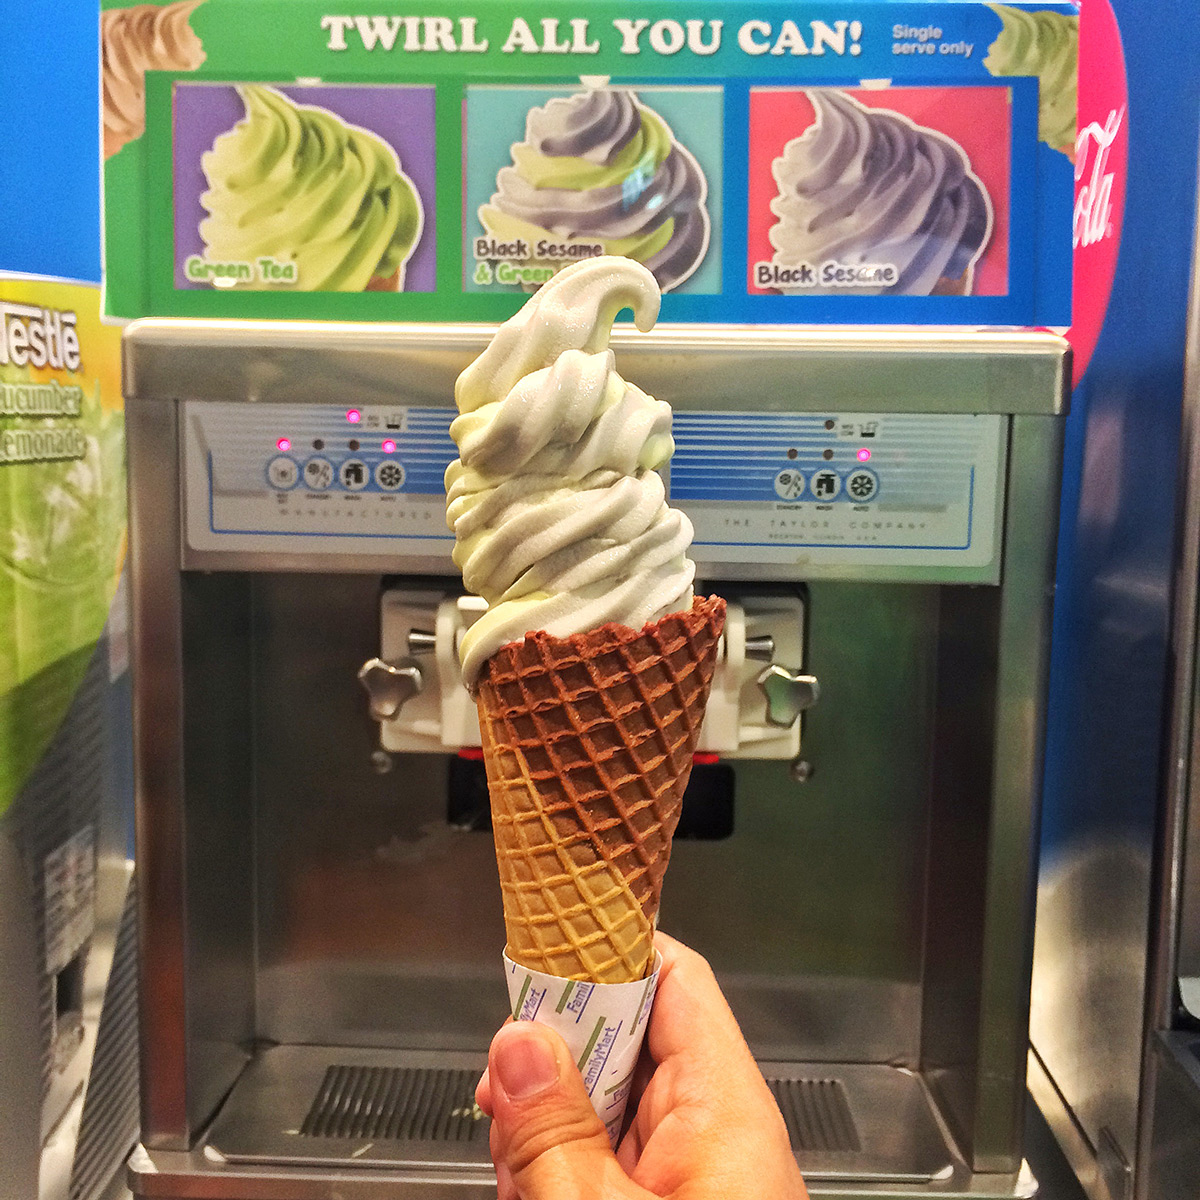 FamilyMart Twirl All You Can in Green Tea and Black Sesame soft serve ice cream